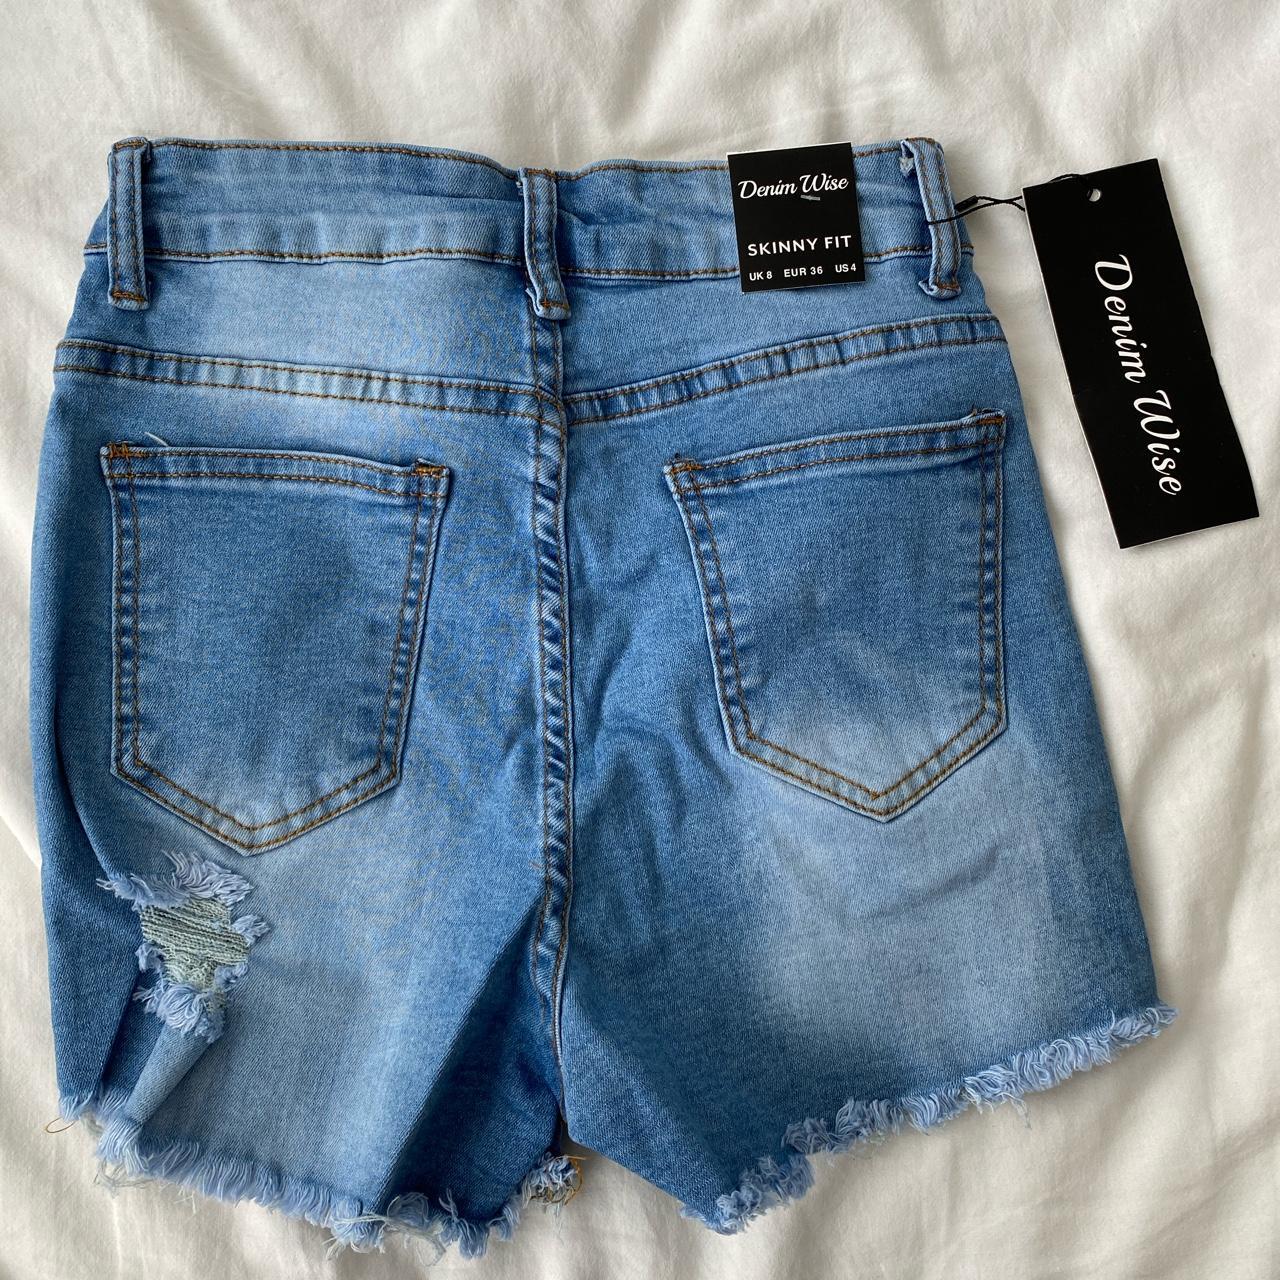 I Saw It First Women's Blue Shorts (2)